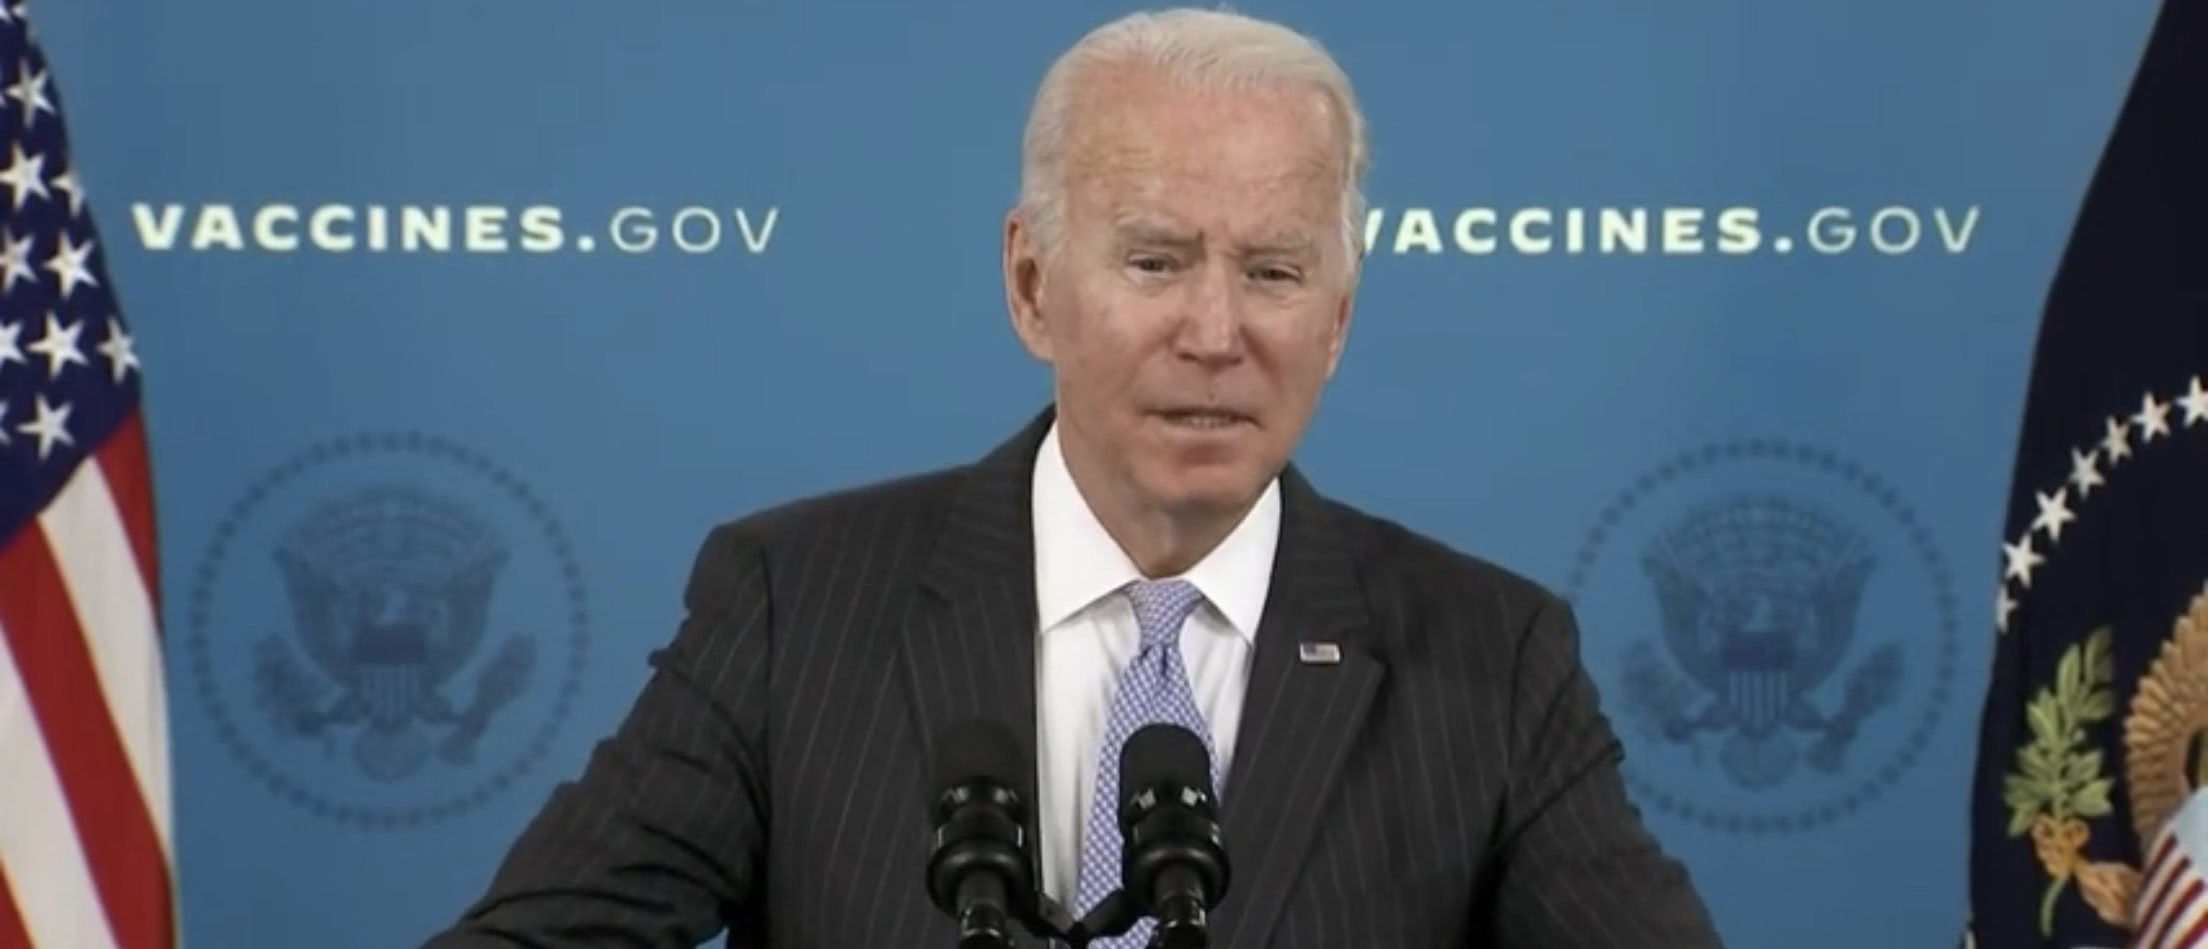 Biden Deflects Blame For McAuliffe Loss, Says He Can’t Stop Republican Turnout